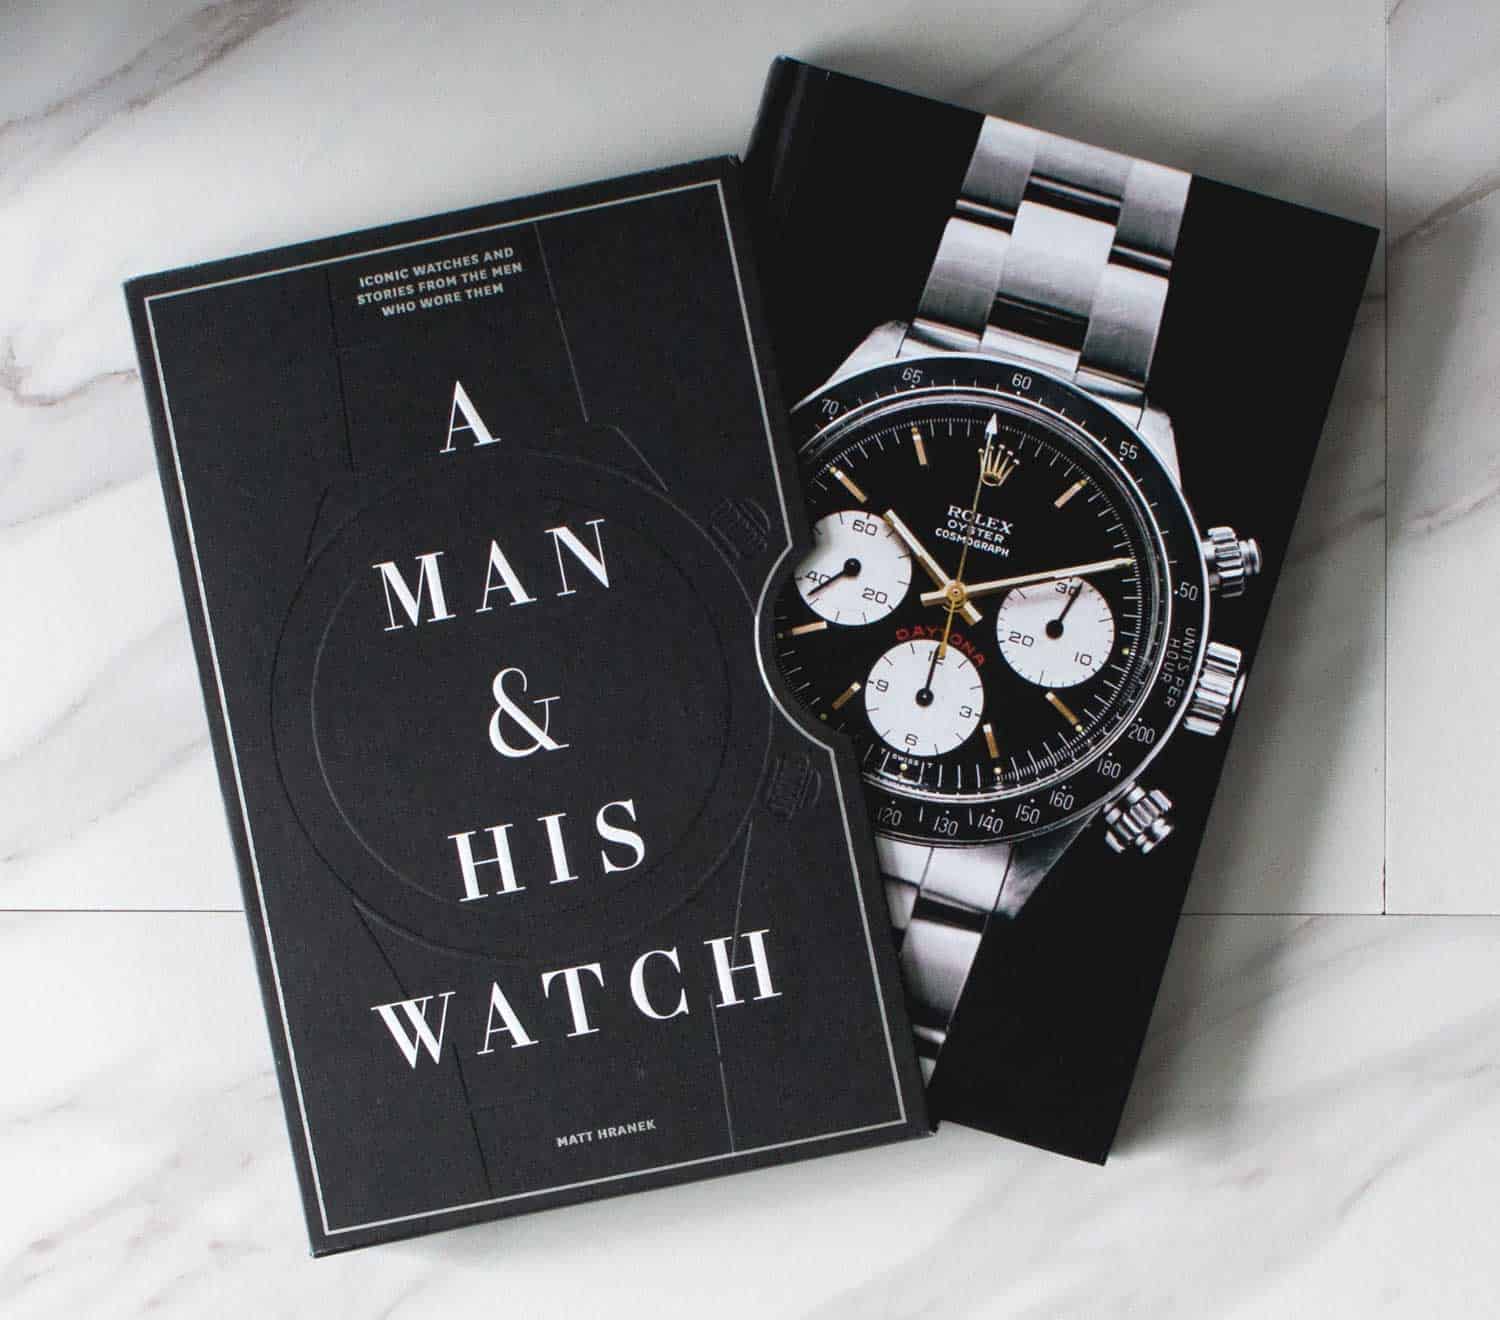 A Man and His Watch Book Iconic Watches and Stories from the Men Who Wore Them